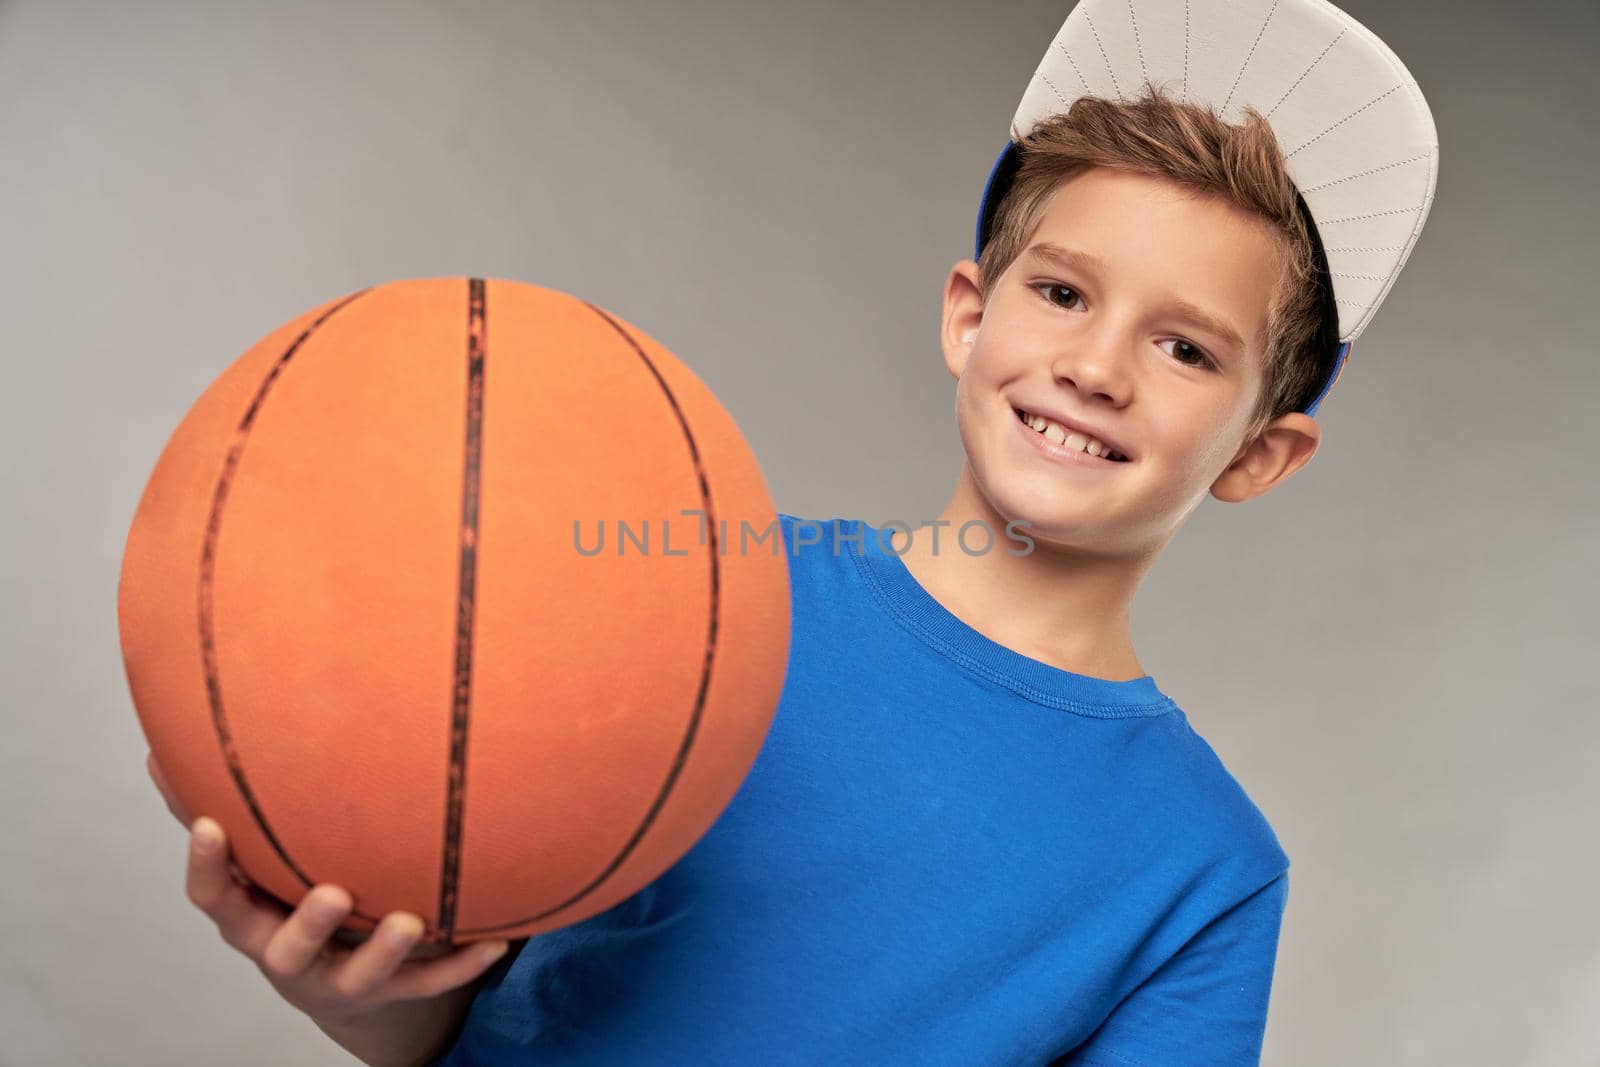 Cute boy basketball player holding game ball and smiling while standing against gray background